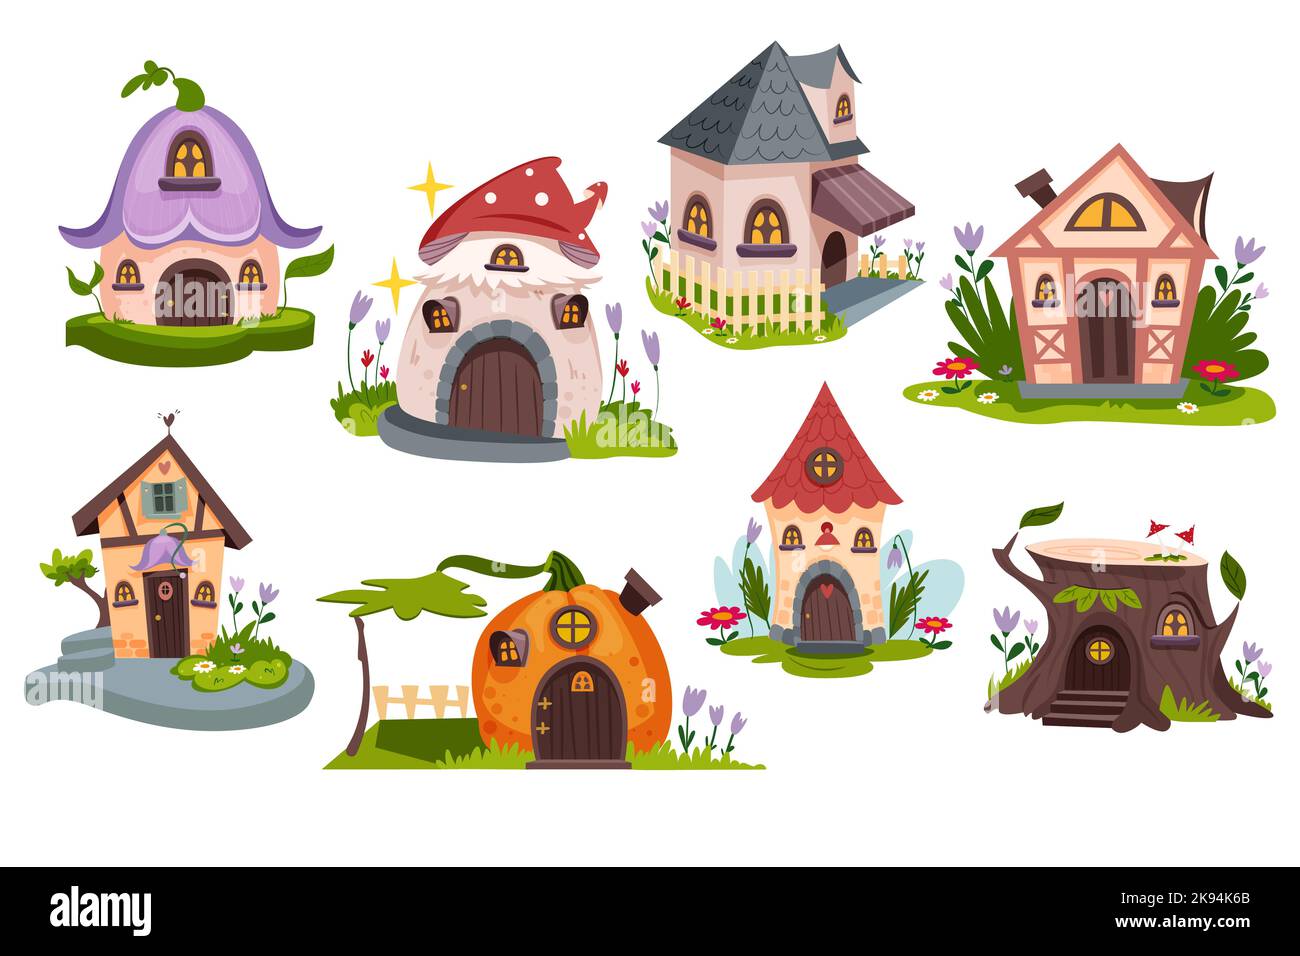 Cartoon fairytale houses. Cute dwellings or buildings set of gnome, dwarf or elf. Magic forest village with beautiful agaric mushroom, pumpkin and stump homes in green garden or fantasy wood. Stock Vector